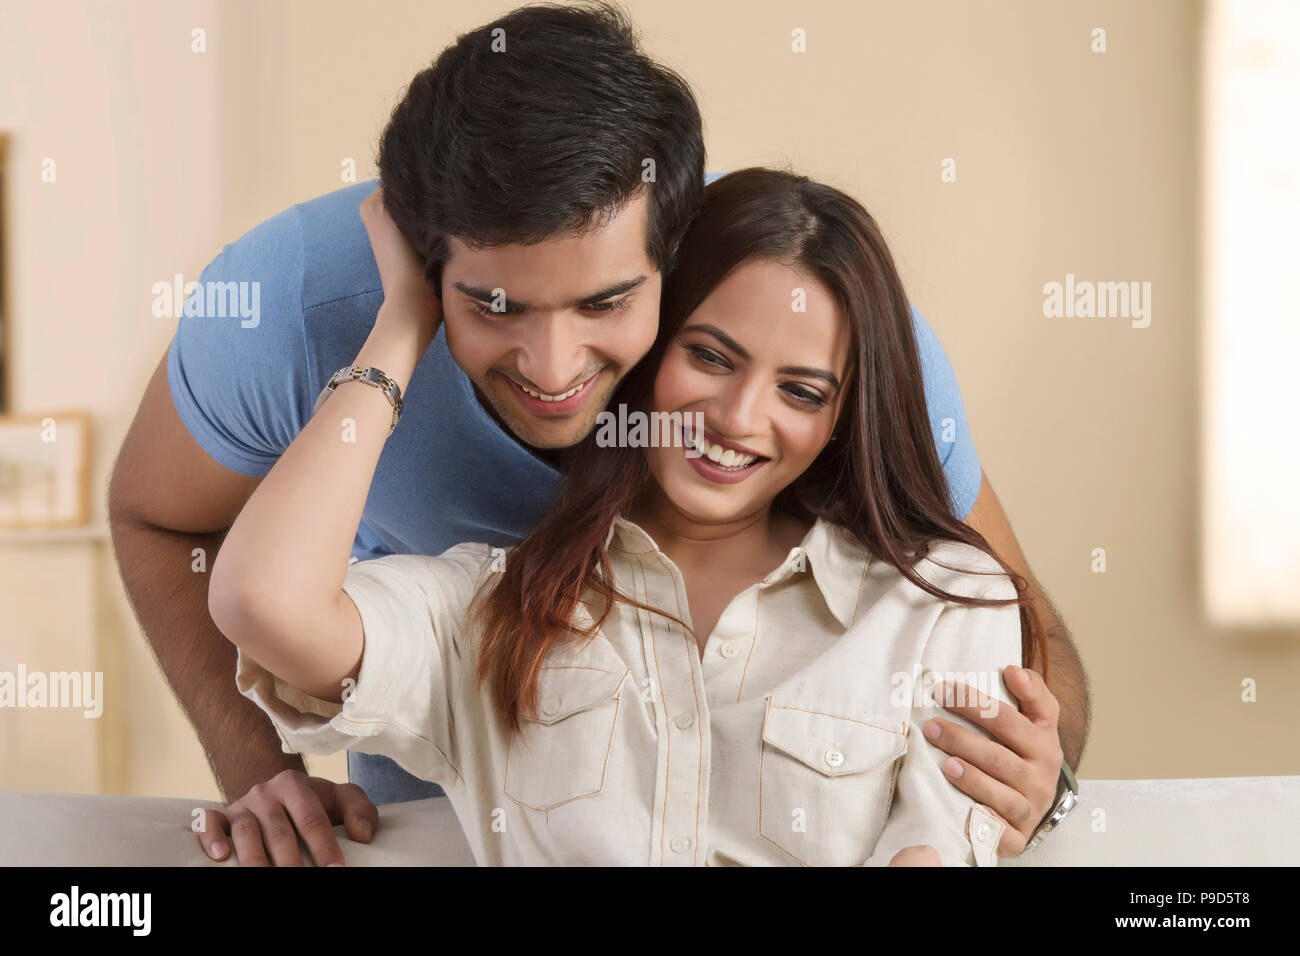 Portrait of smiling young couple hugging Banque D'Images